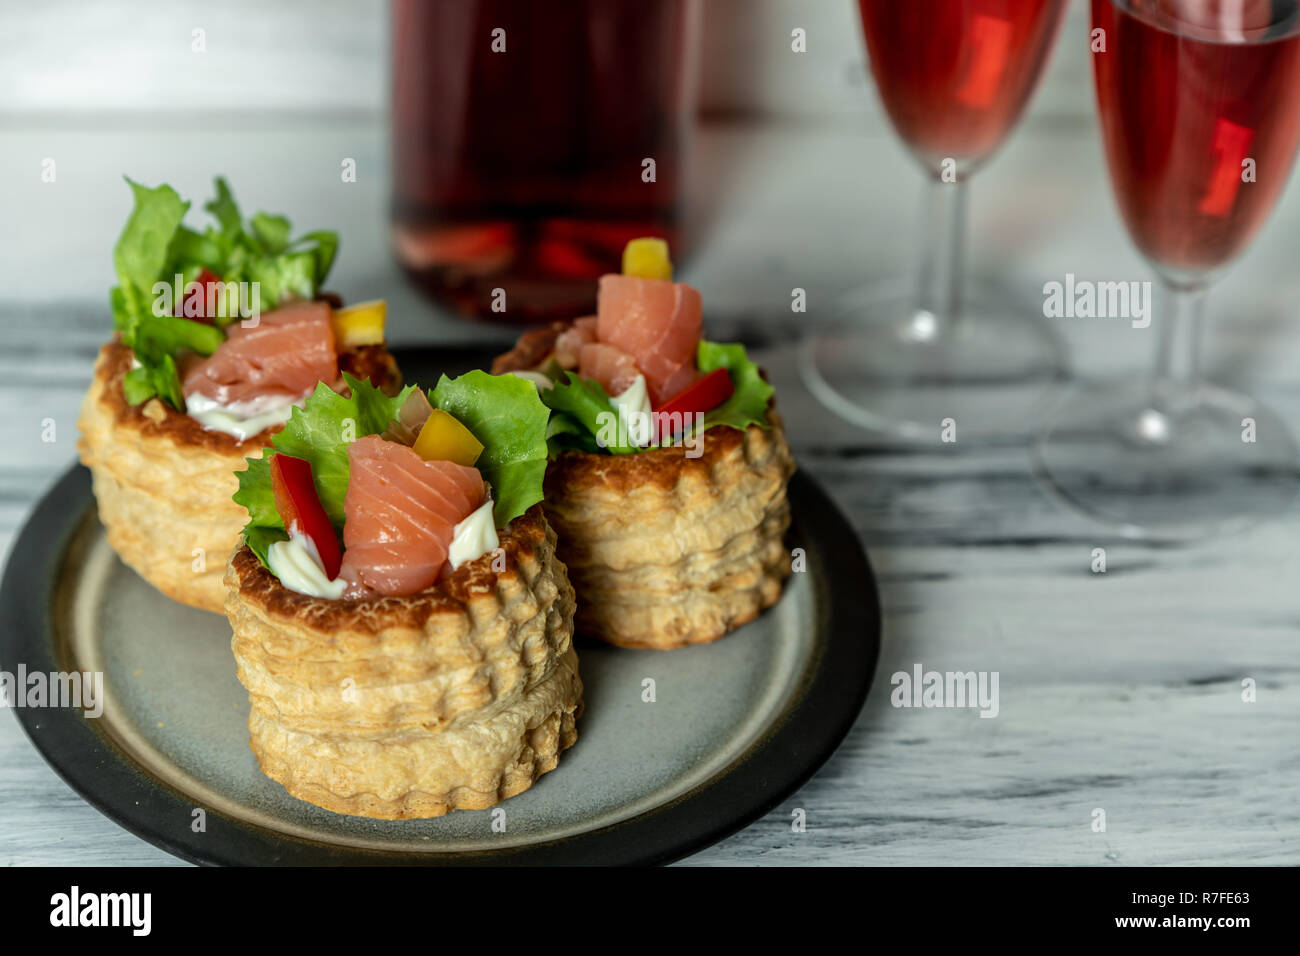 French cuisine, crunchy patties with lettuce and smoked salmon on a bright, rustic background, next to a glass of red wine Stock Photo